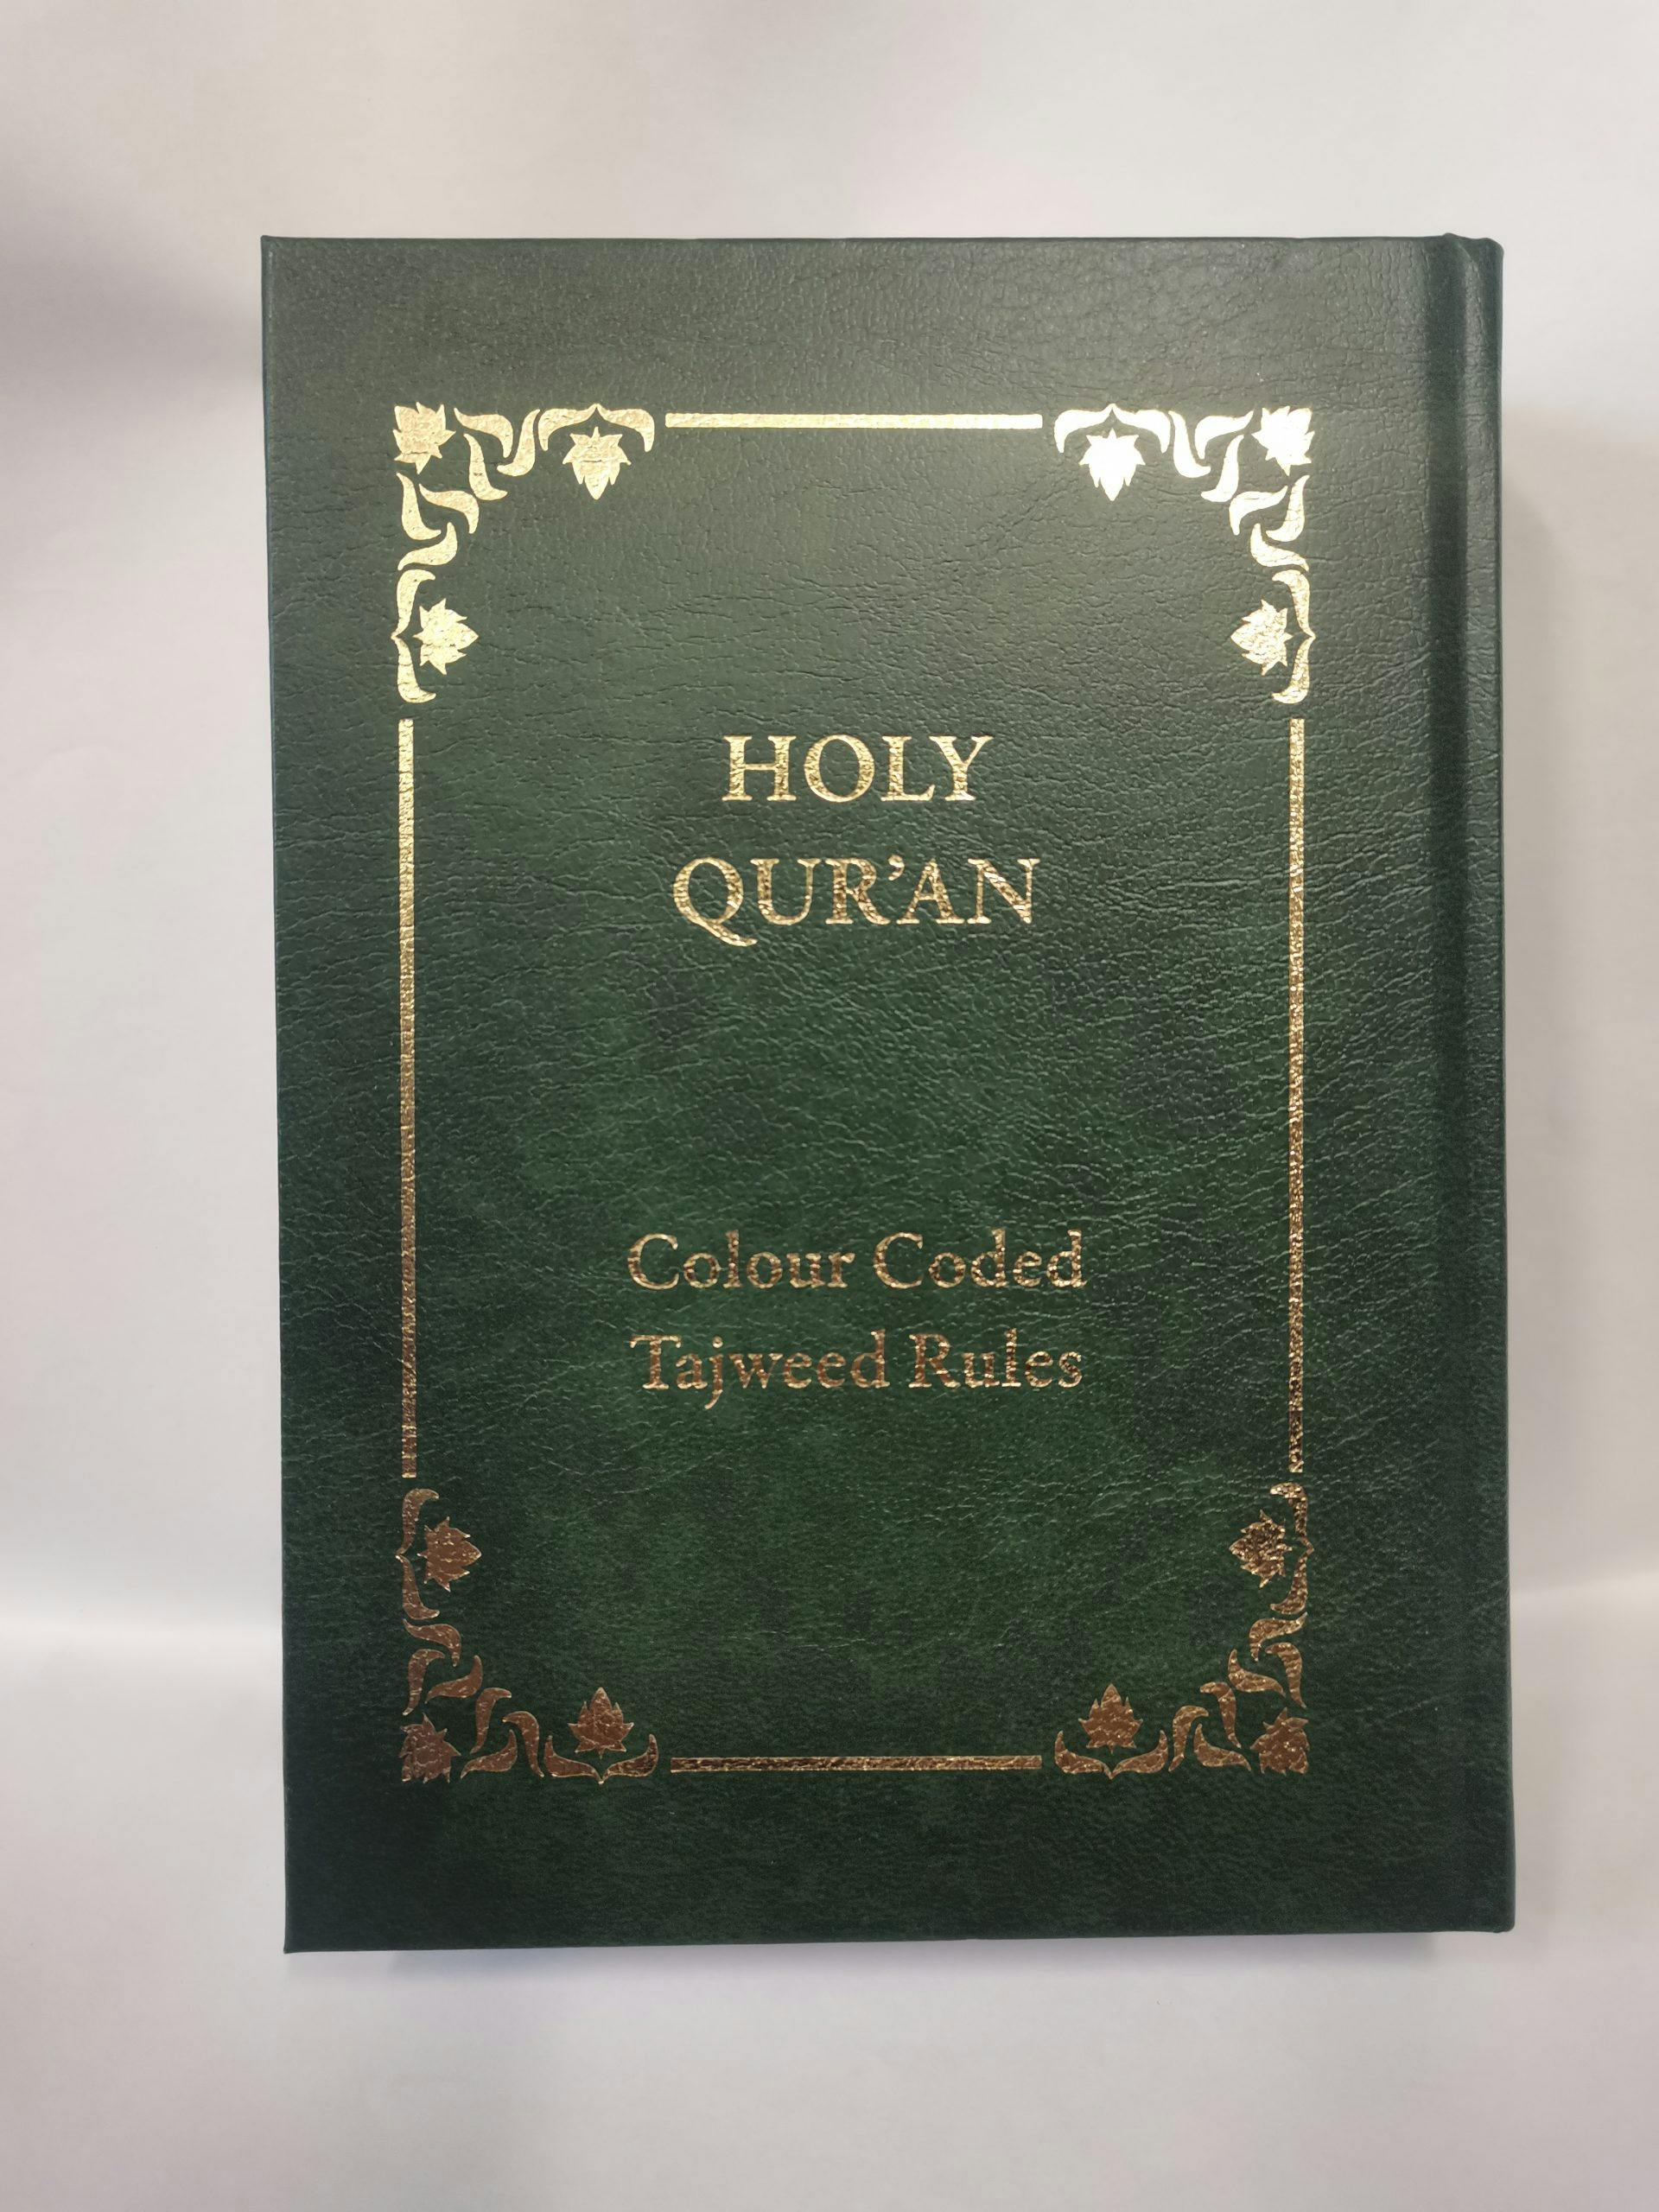 Featured image of Holy Qur'an C/Coded Tajweed rules